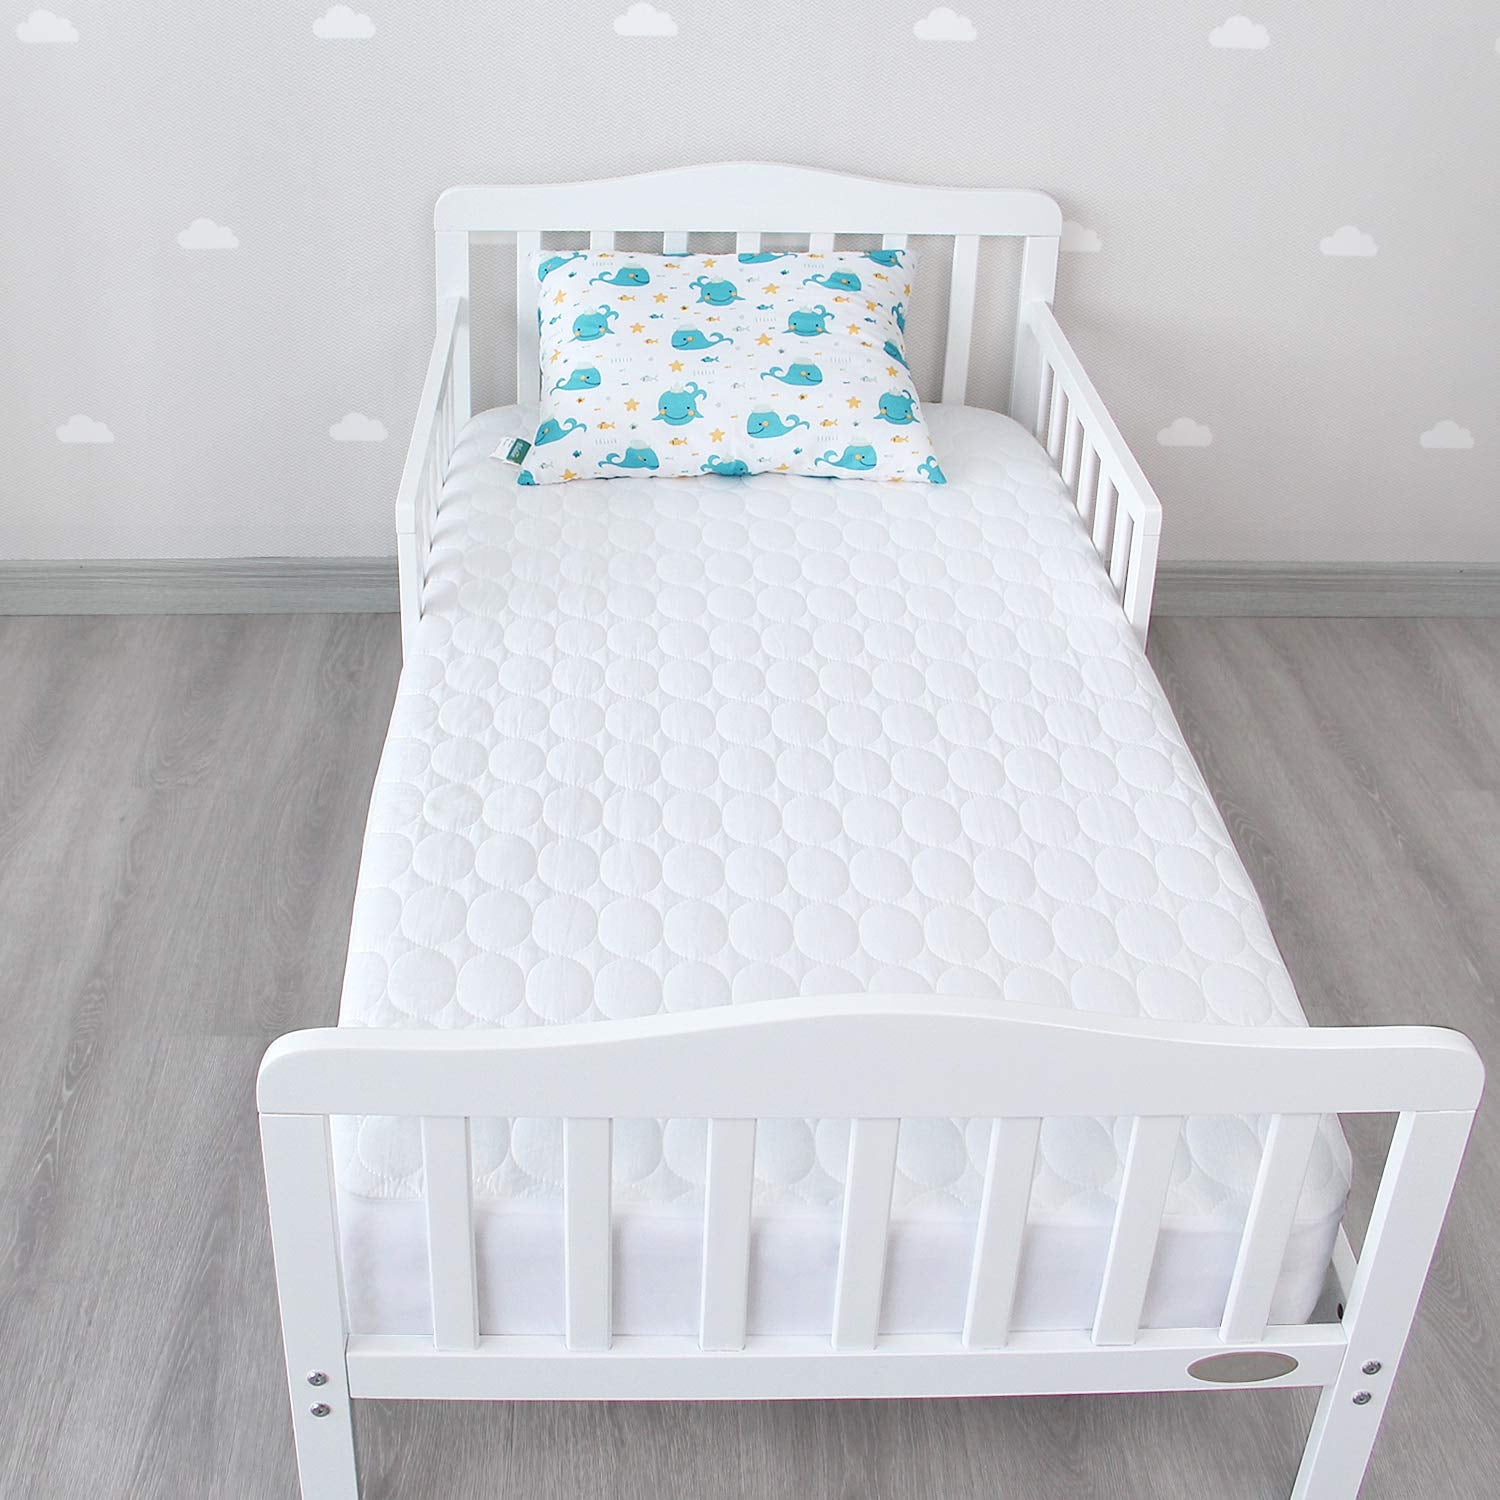 Blue Crib Mattress Pads & Covers for sale